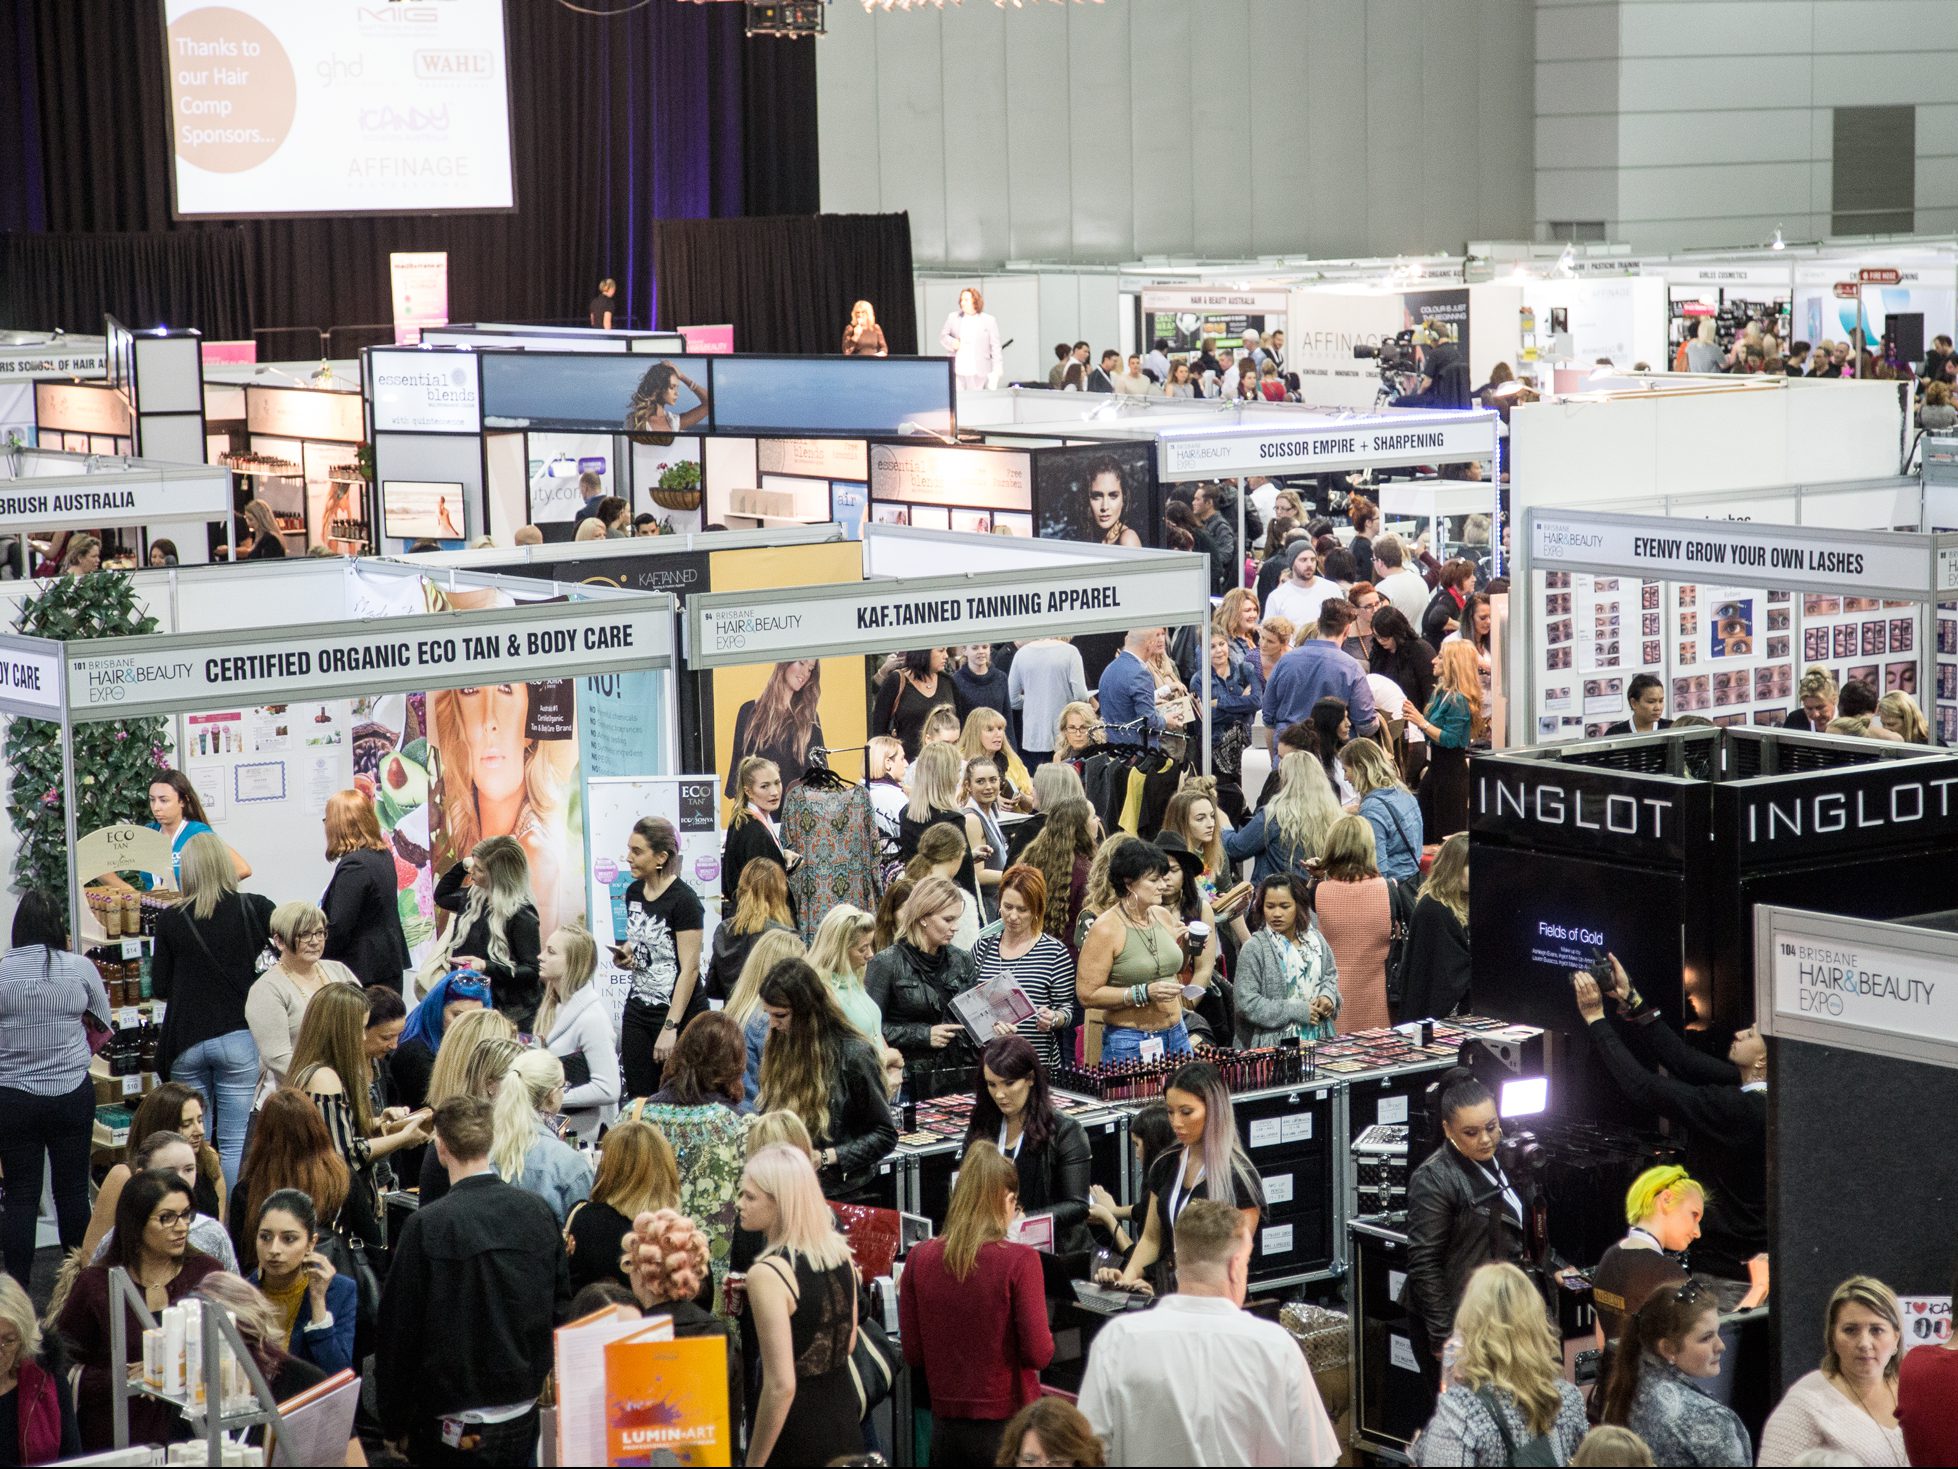 2016 Brisbane Hair and Beauty Expo wraps